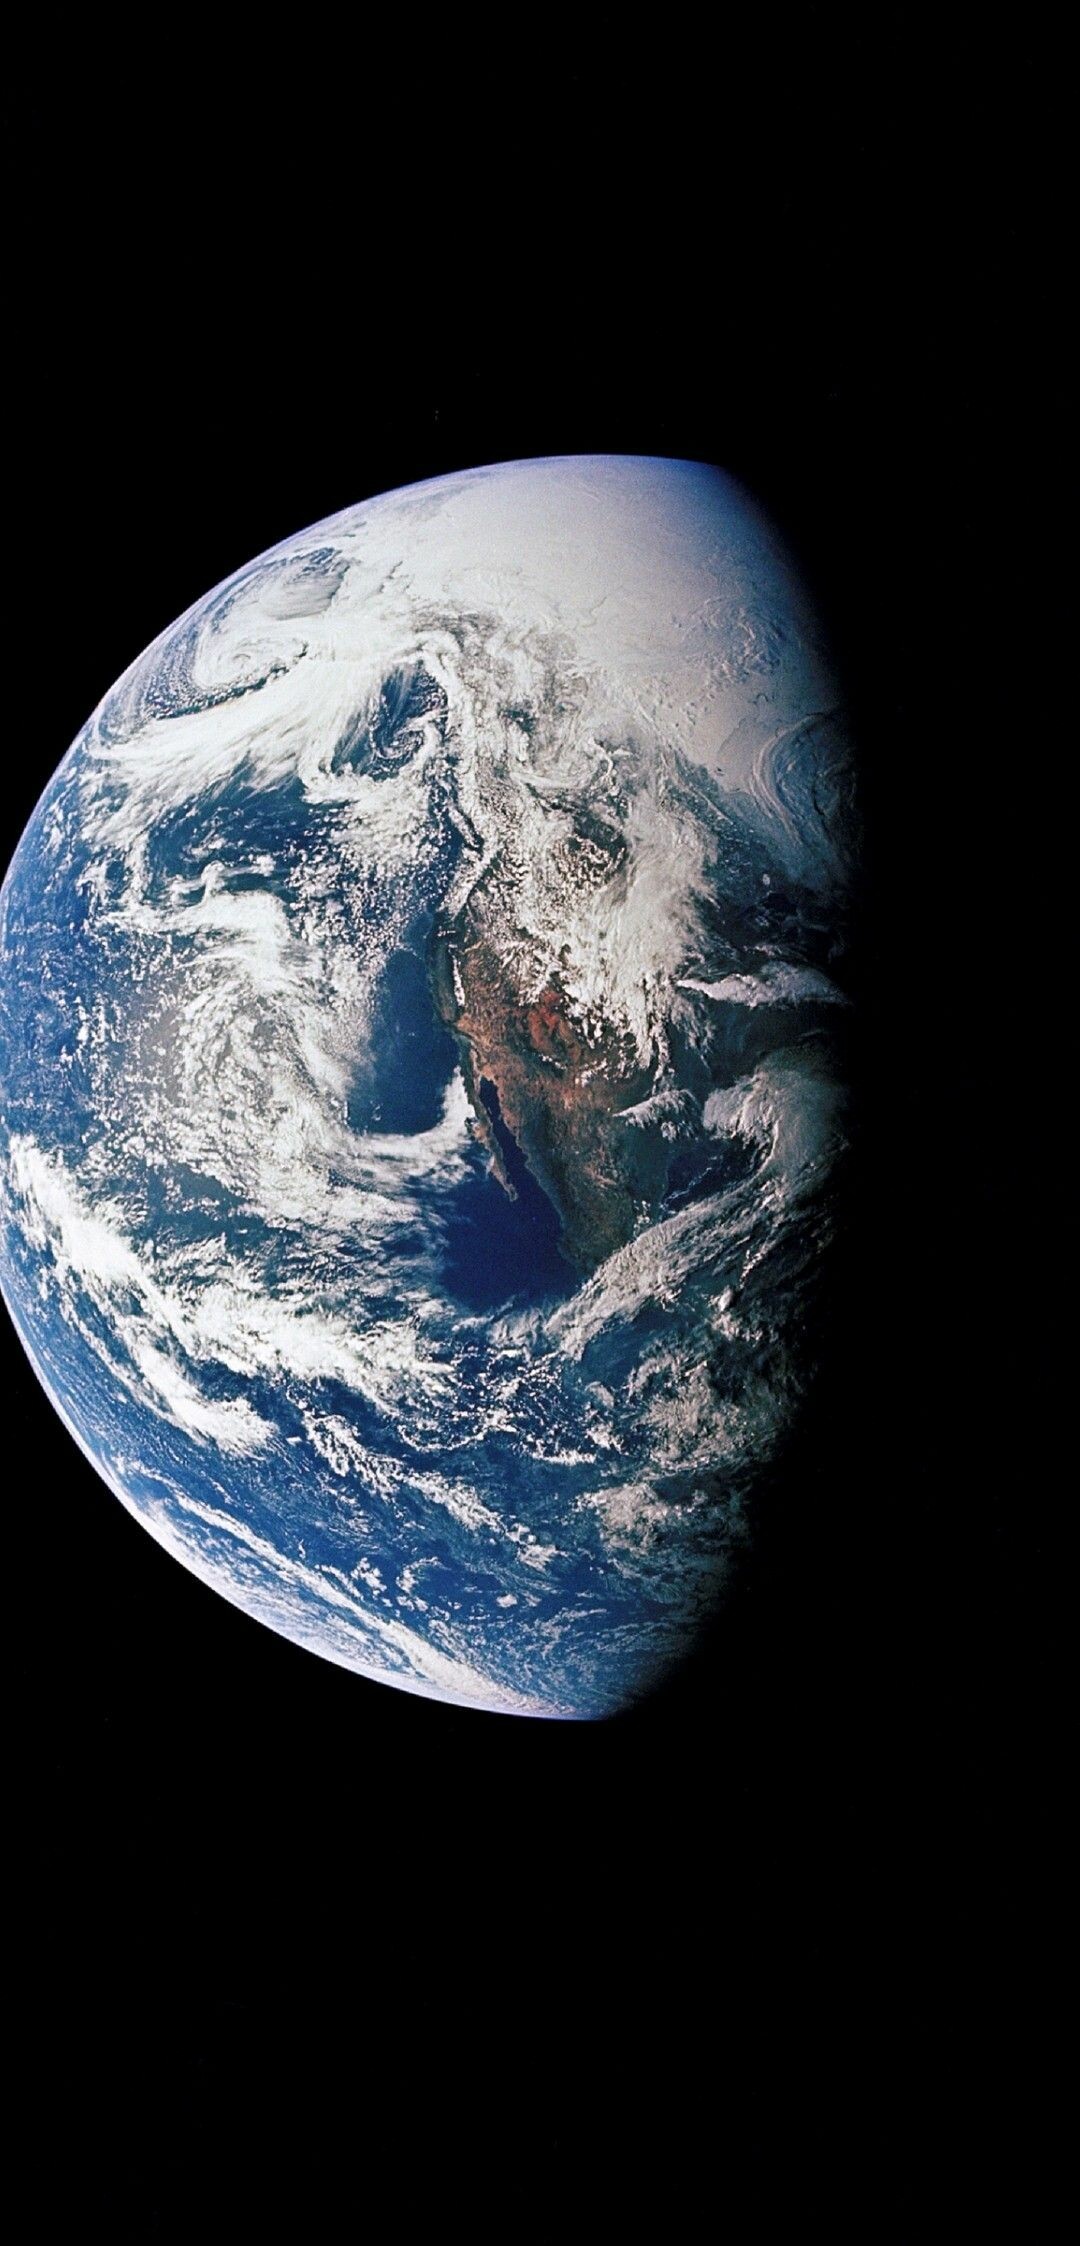 Earth: The planet's diameter is 13,000 km, Astronomical object. 1080x2250 HD Wallpaper.